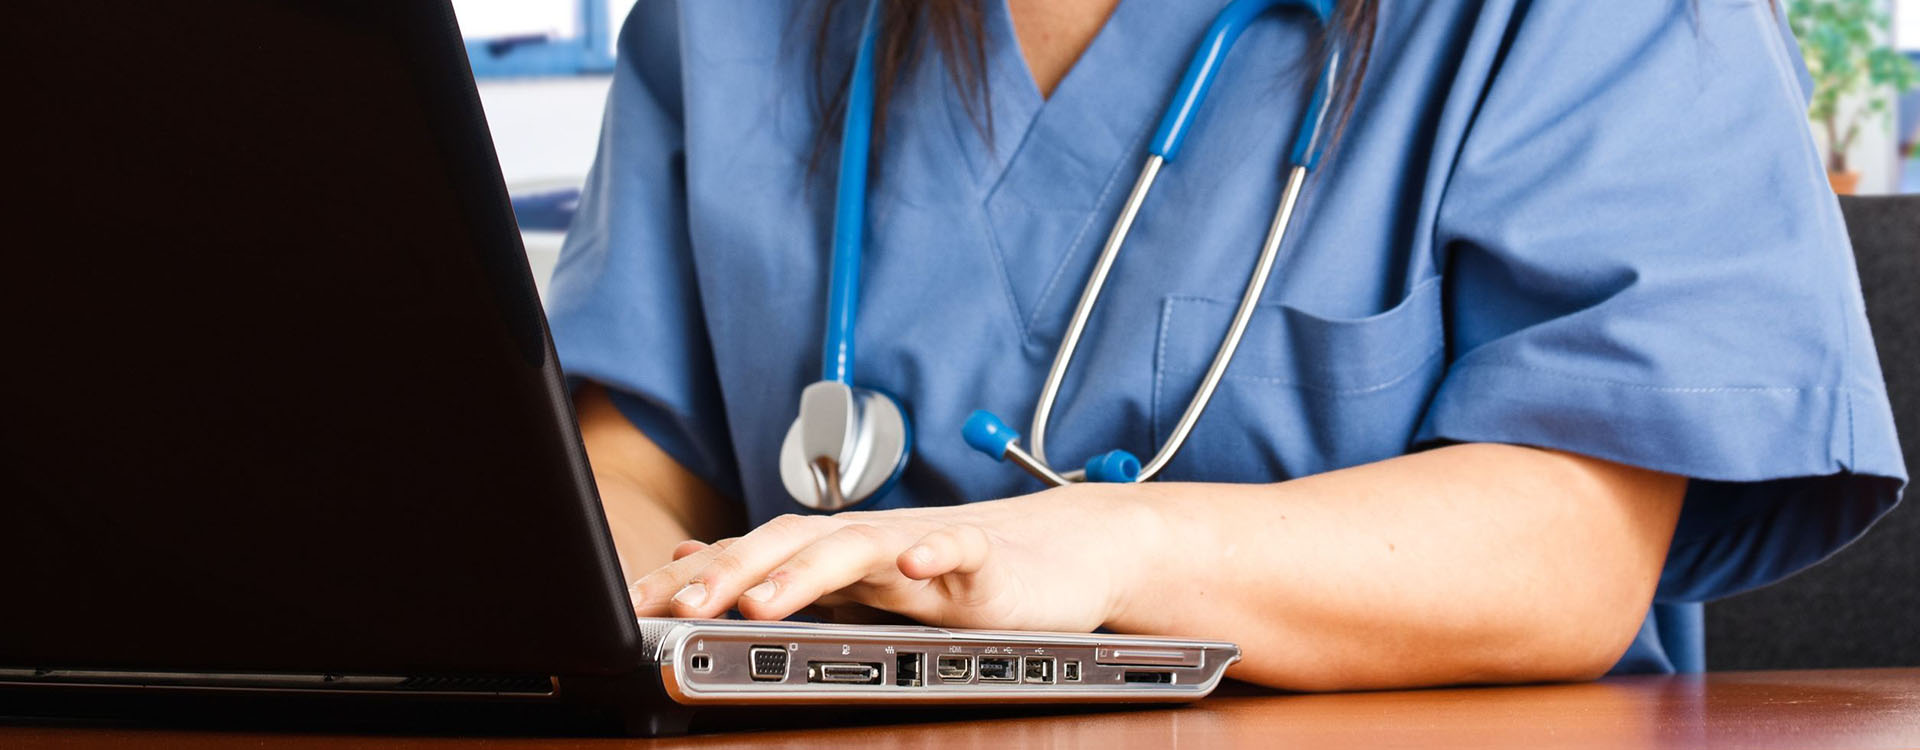 medical professional typing on a laptop